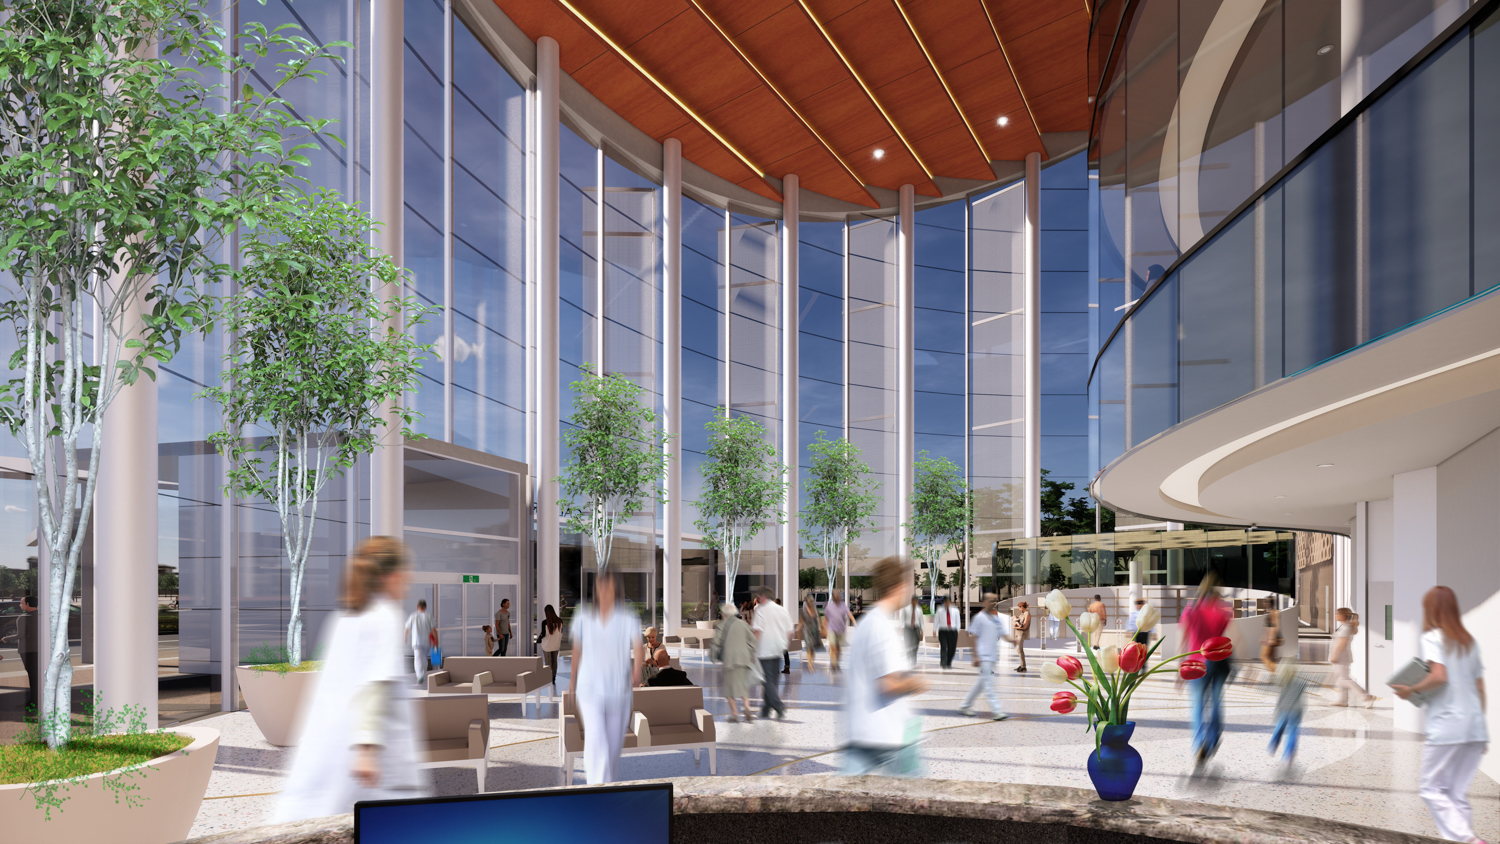 Rendered activity within the lobby of the California Northstate University proposed Natomas hospital, design by Fong & Chang Architects